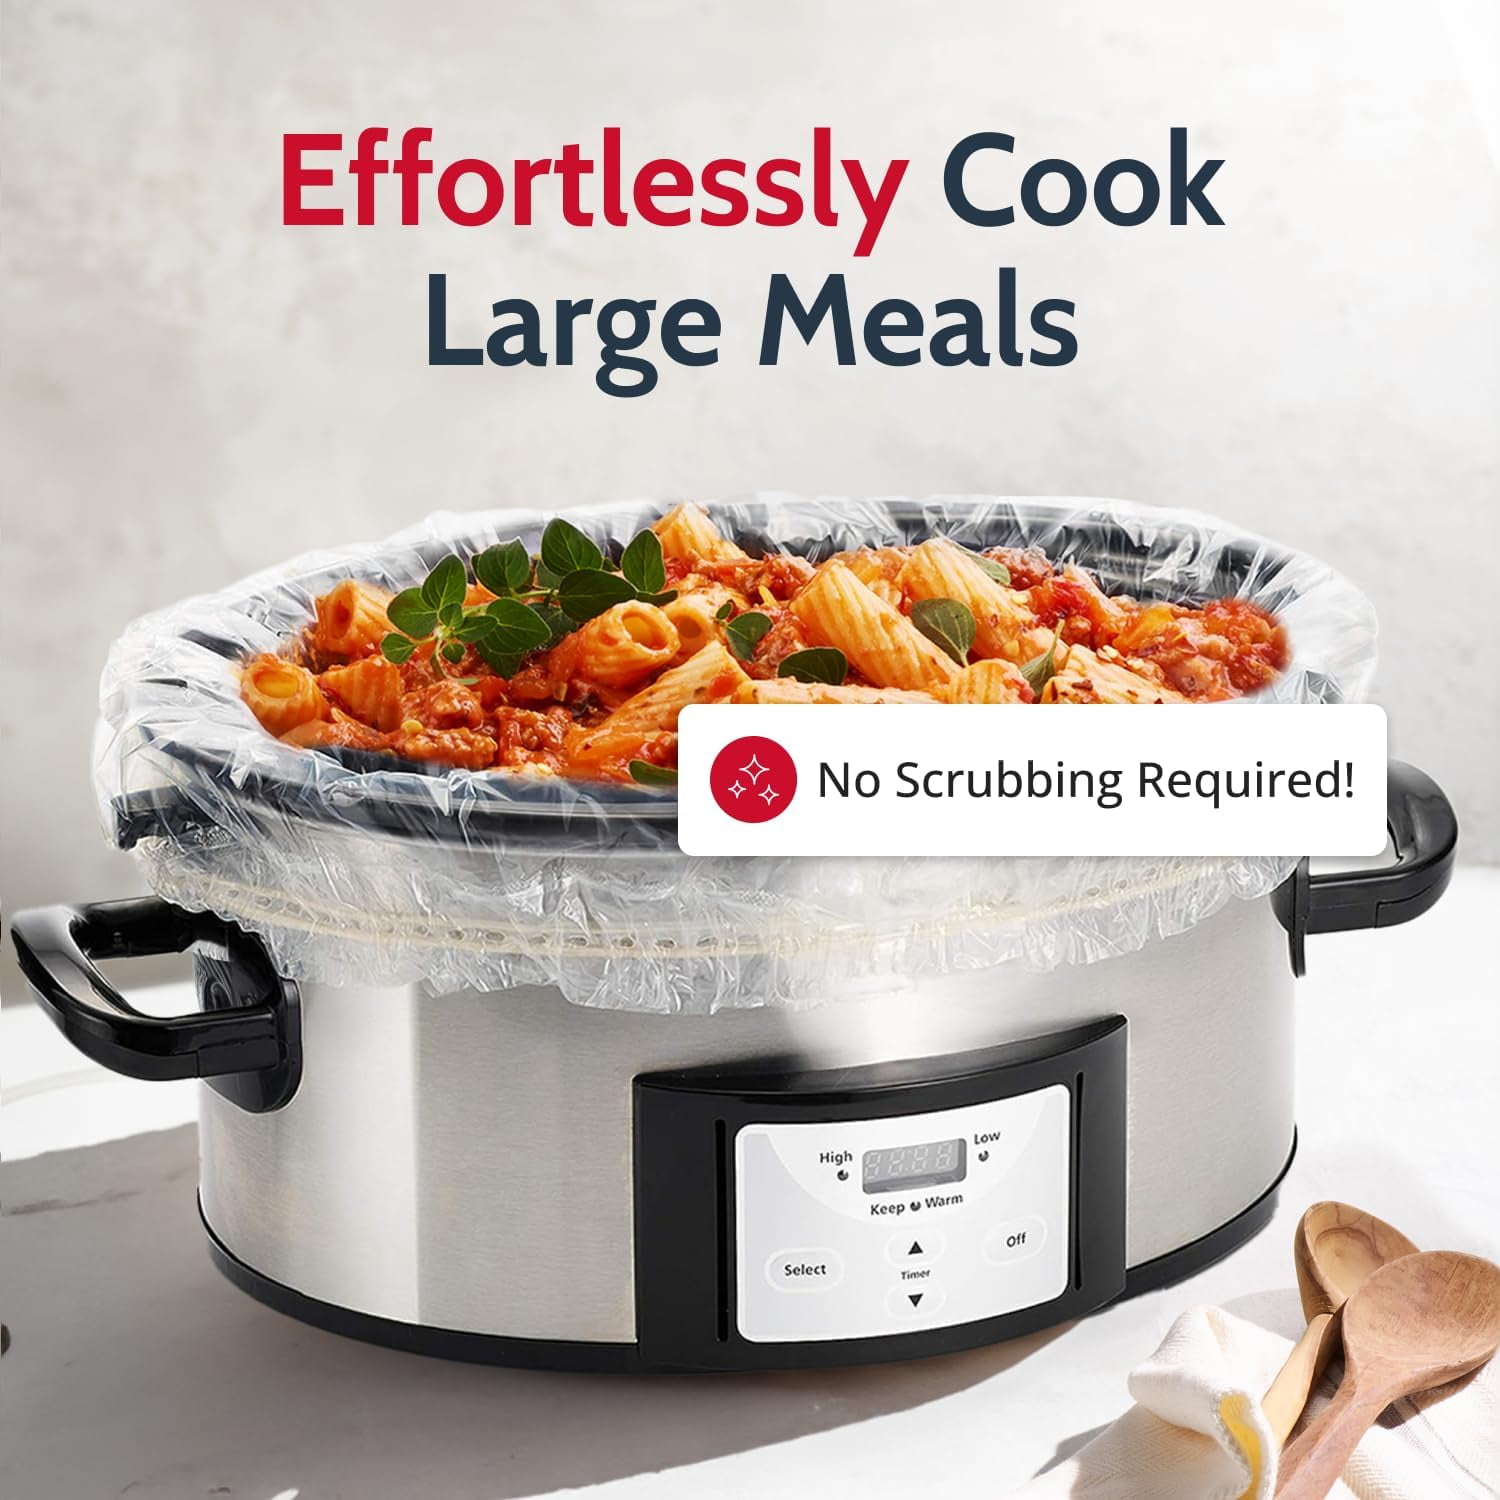 Pansaver 41556 Multi Use Cooking Bags Slow Cooker Liners - Case of 25, 25 -  Kroger